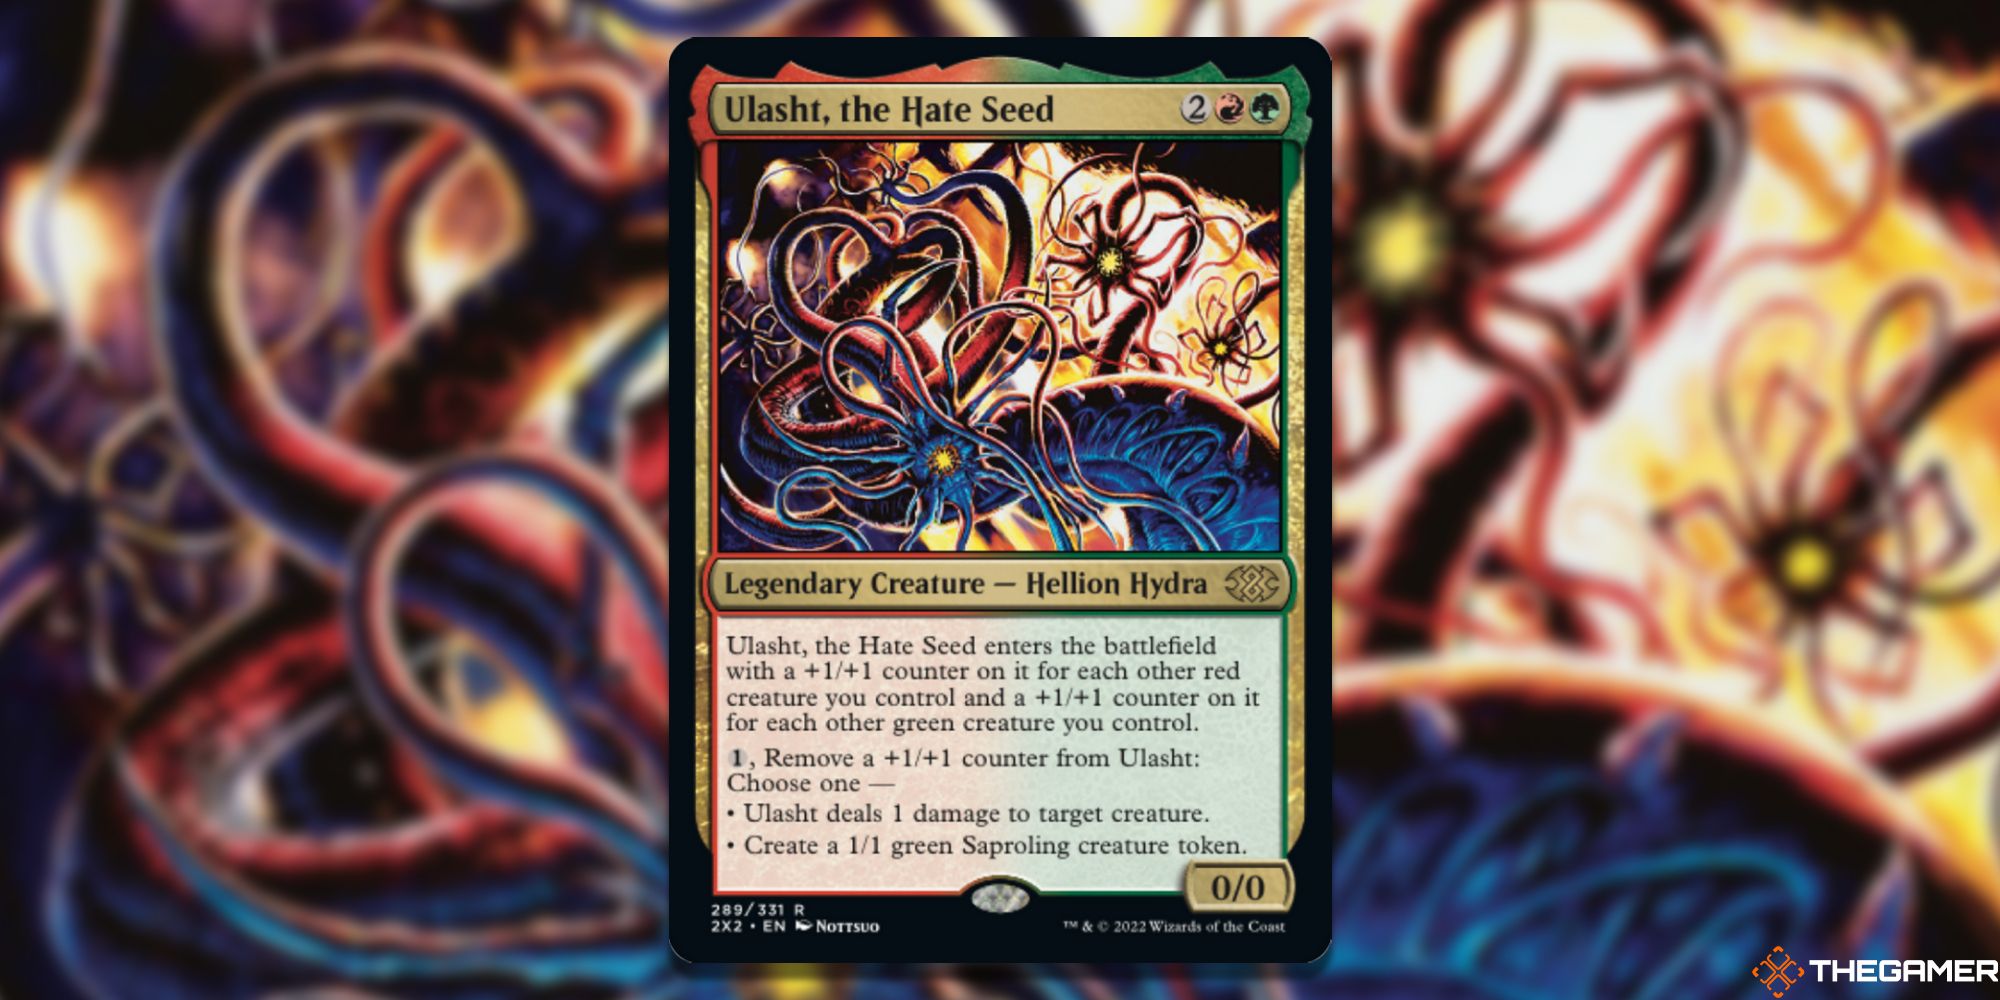 The card Ulasht, the Hate Seed from Magic: The Gathering.